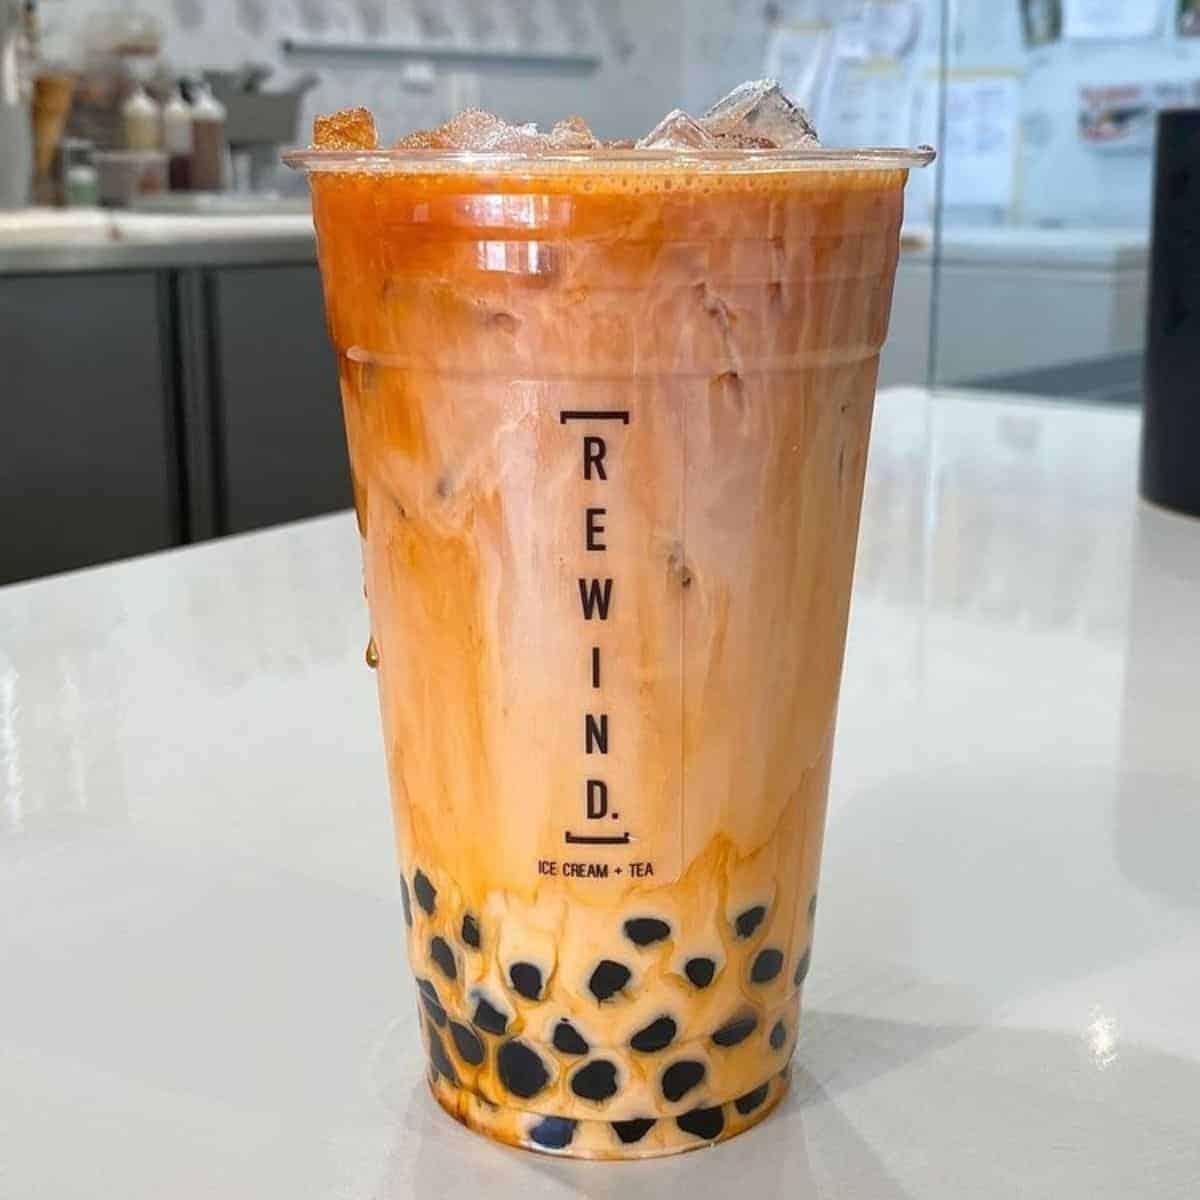 A cup of Thai tea mixed with milk, topped with ice